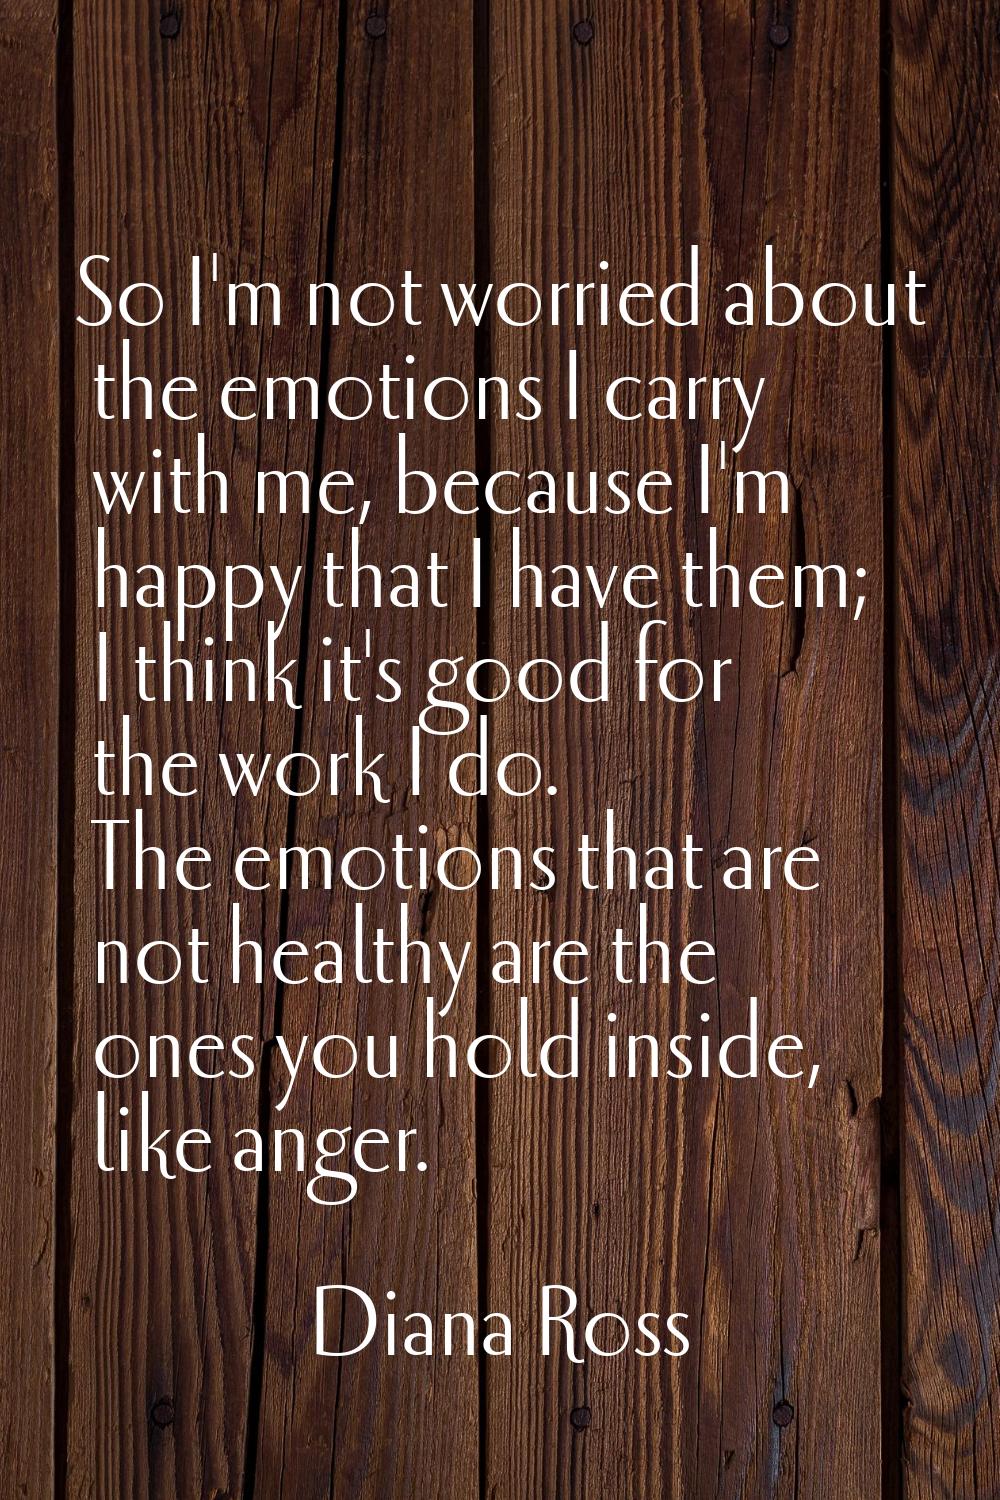 So I'm not worried about the emotions I carry with me, because I'm happy that I have them; I think 